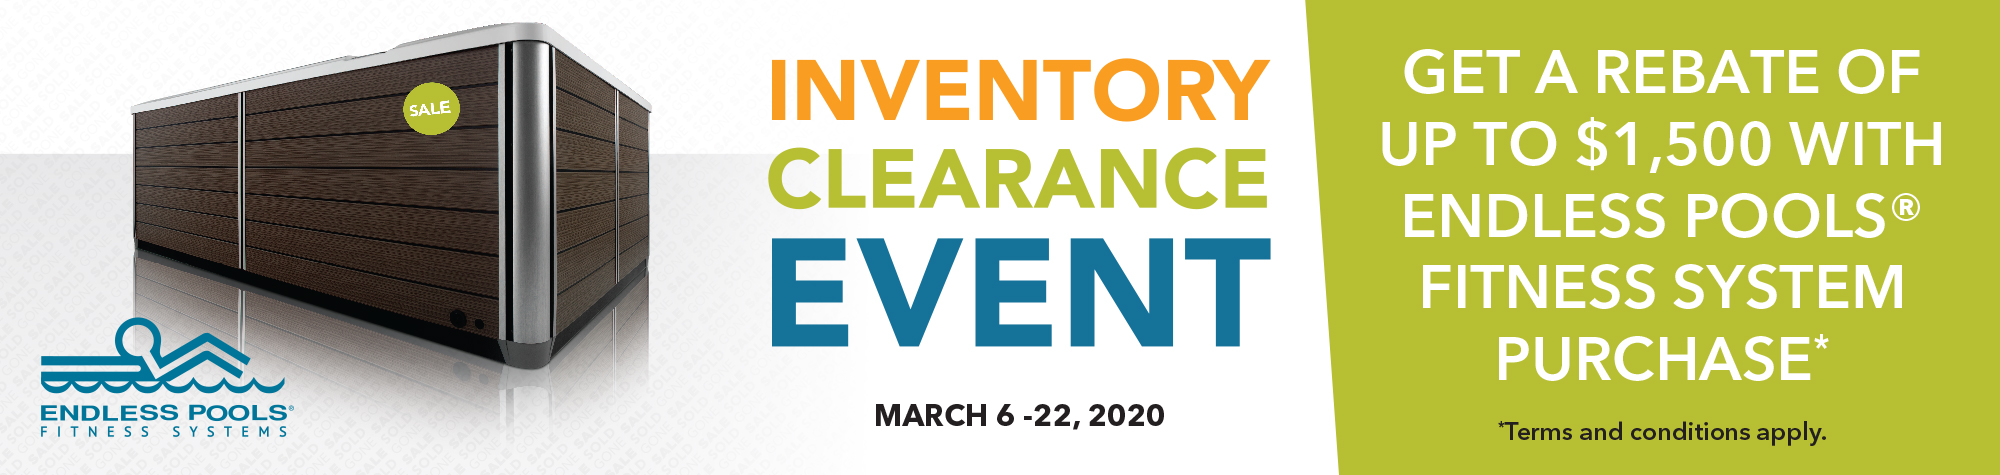 Endless Pools Inventory Clearance Event